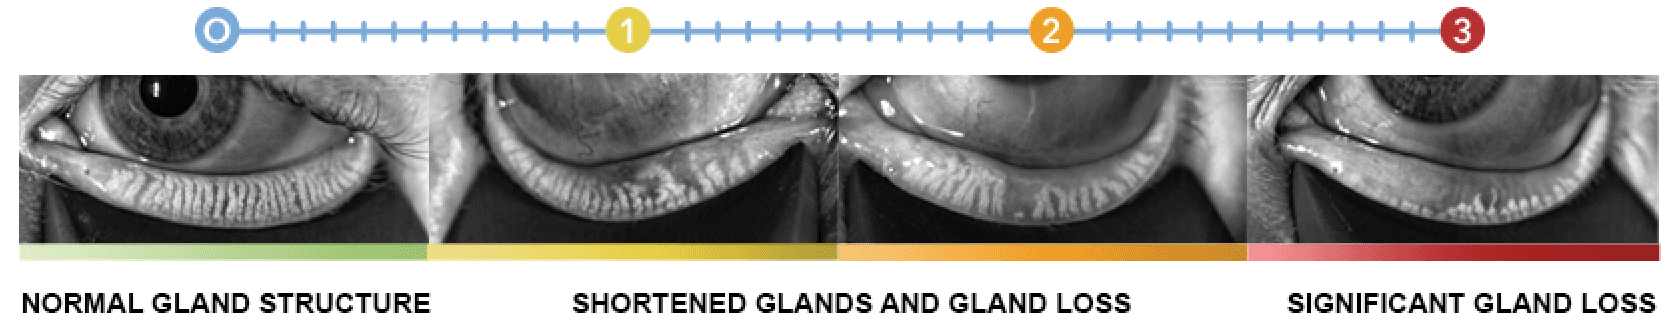 chart showing normal meibomian gland structure through significant gland loss